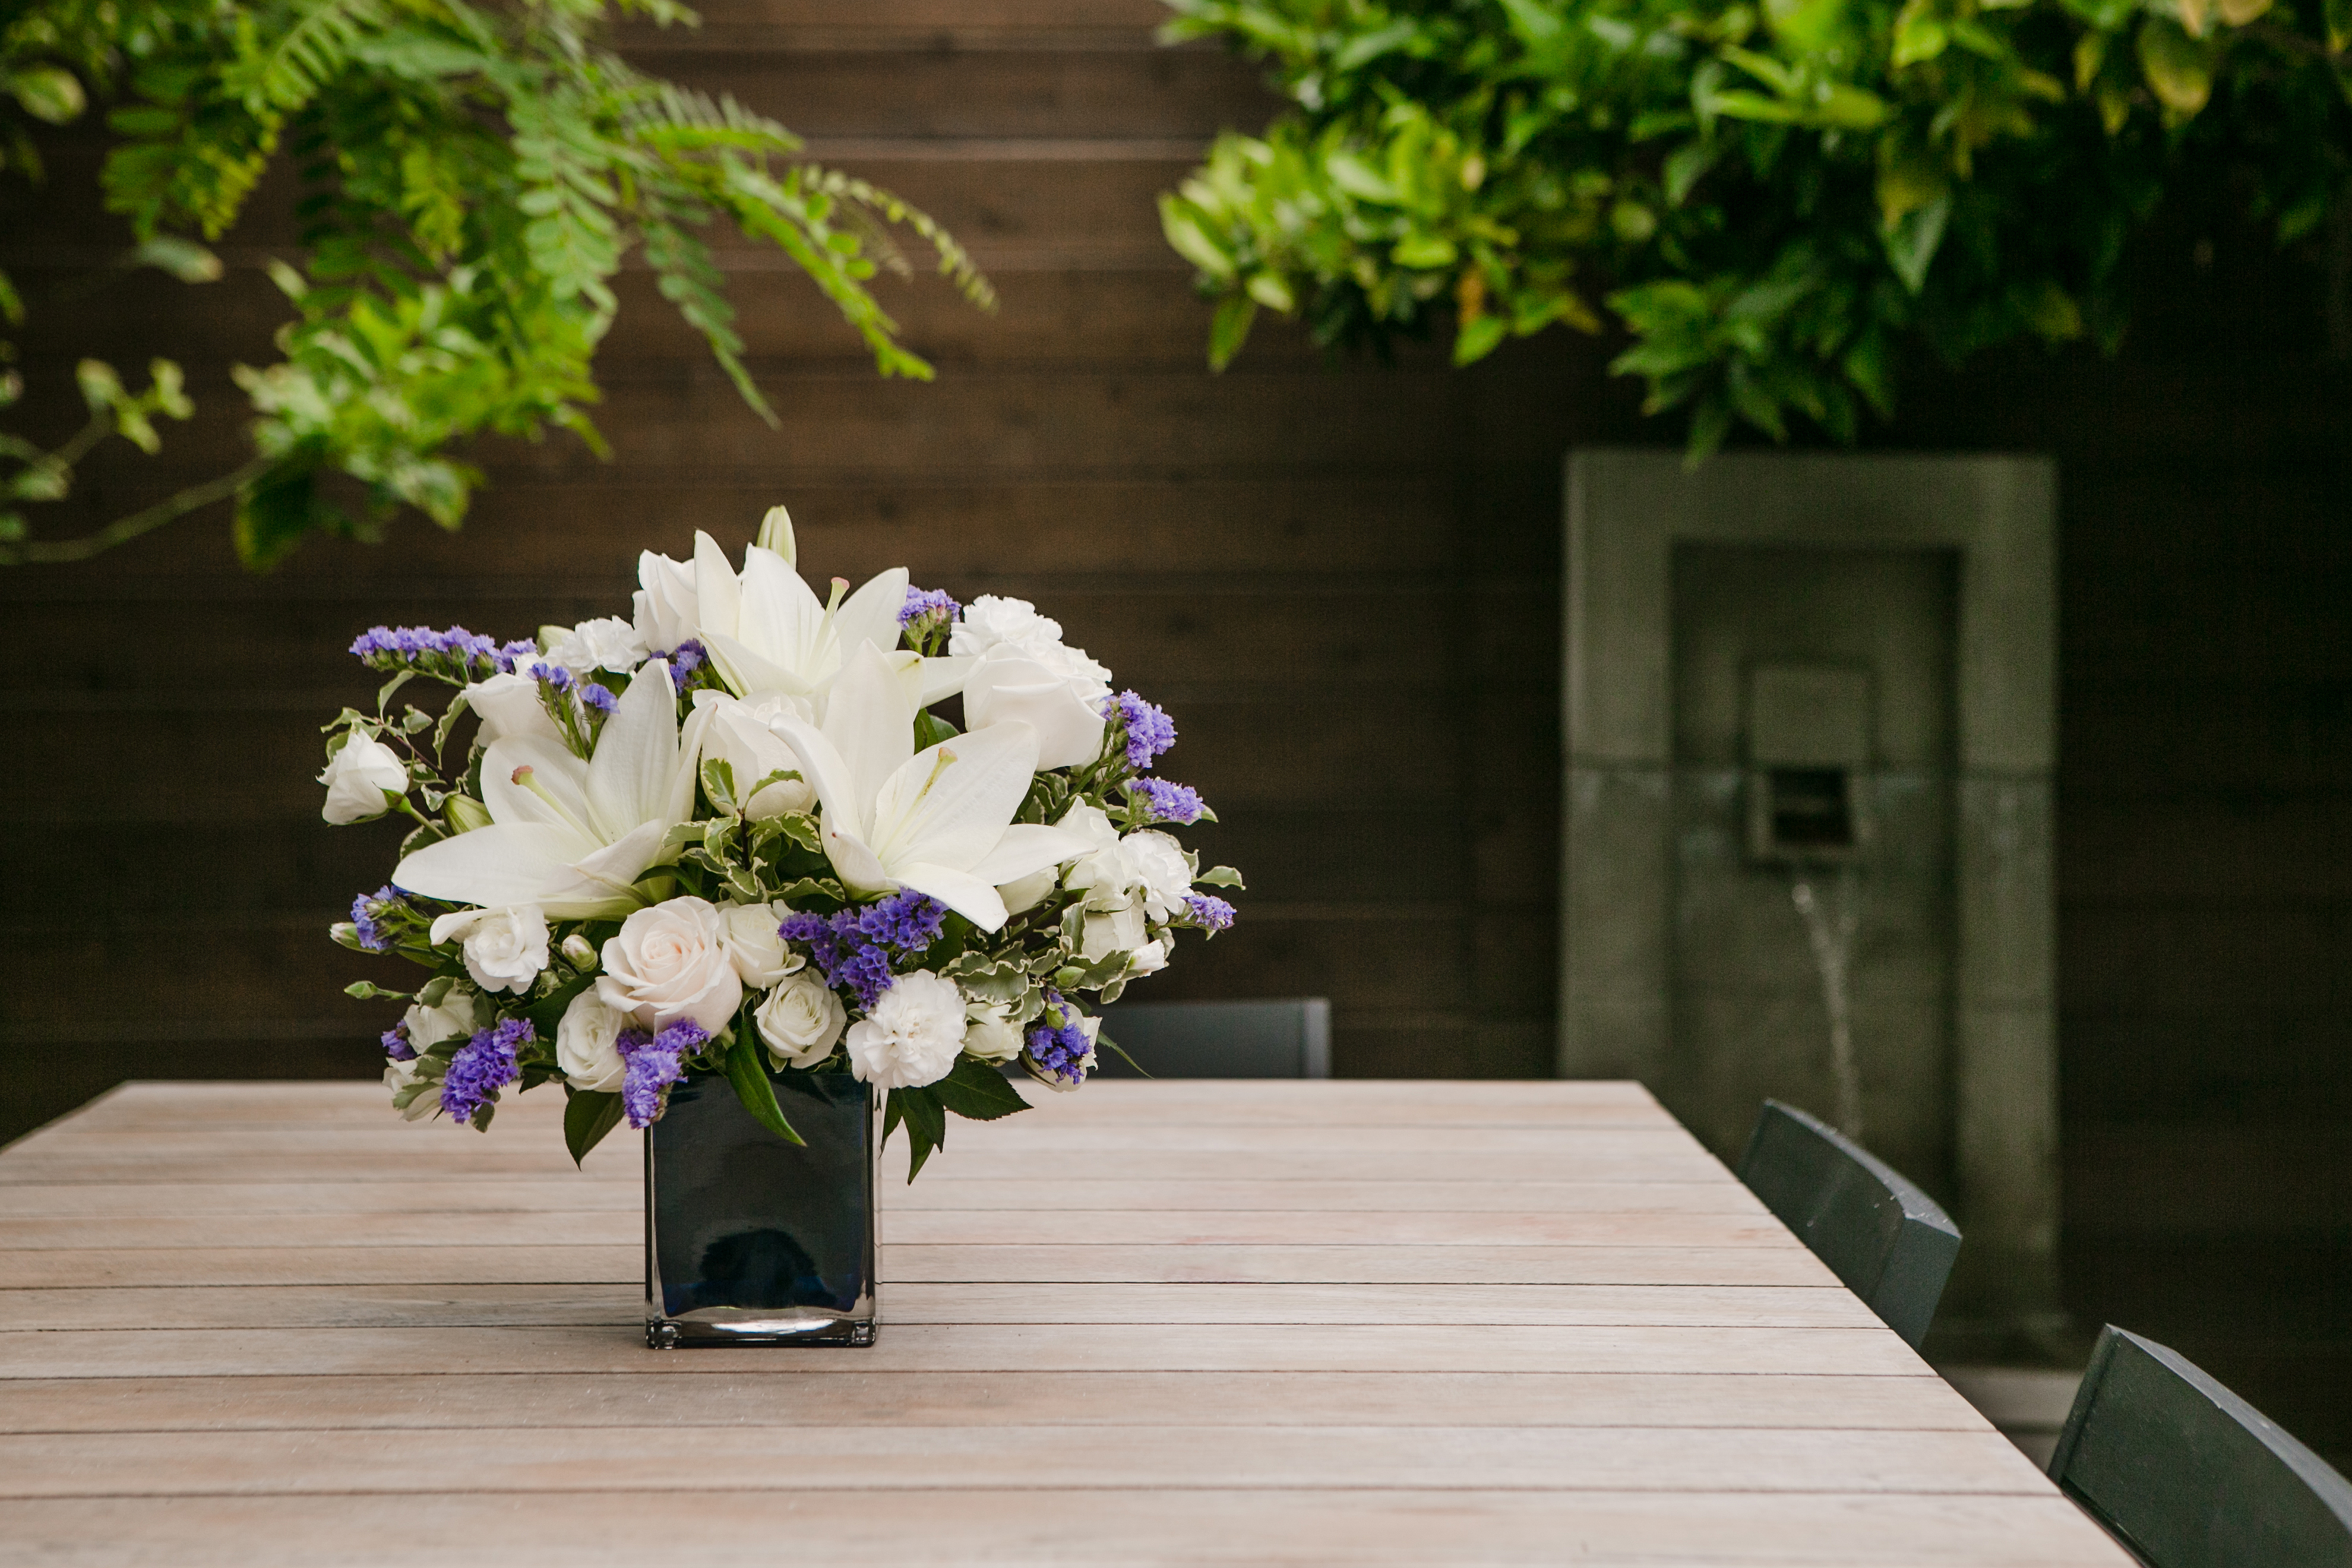 white roses, white lilies, and purple statice in a blue vase on a table